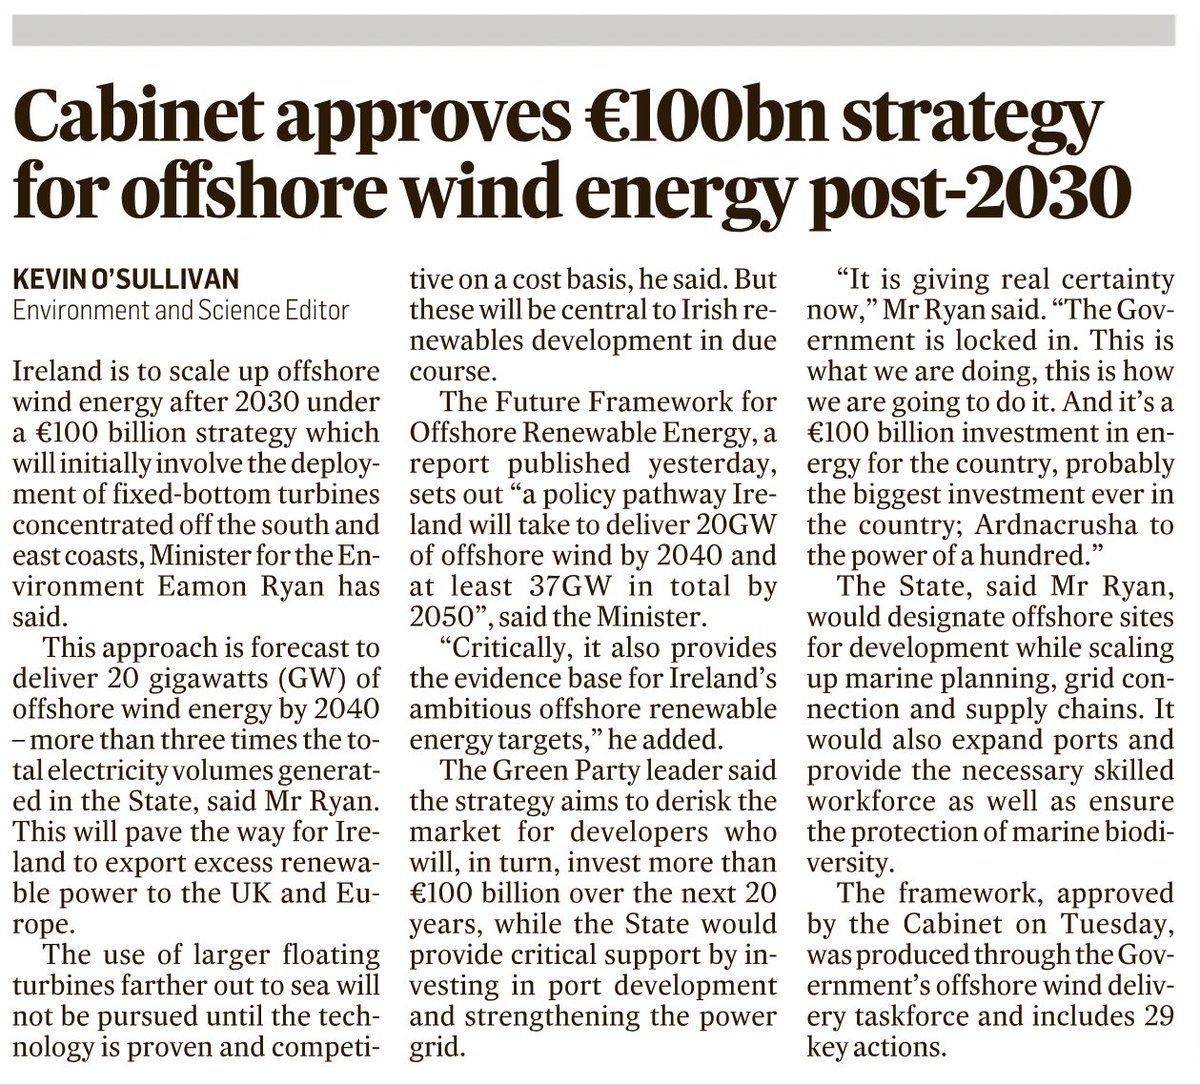 In today's Irish Times - a development that will no doubt frame discussion at tomorrow's open-to-all event. PELGBA are running a free event tomorrow at 2.30pm on planning and the renewable energy sector with key speakers from the industry. More at: ti.to/BarofIreland/p…